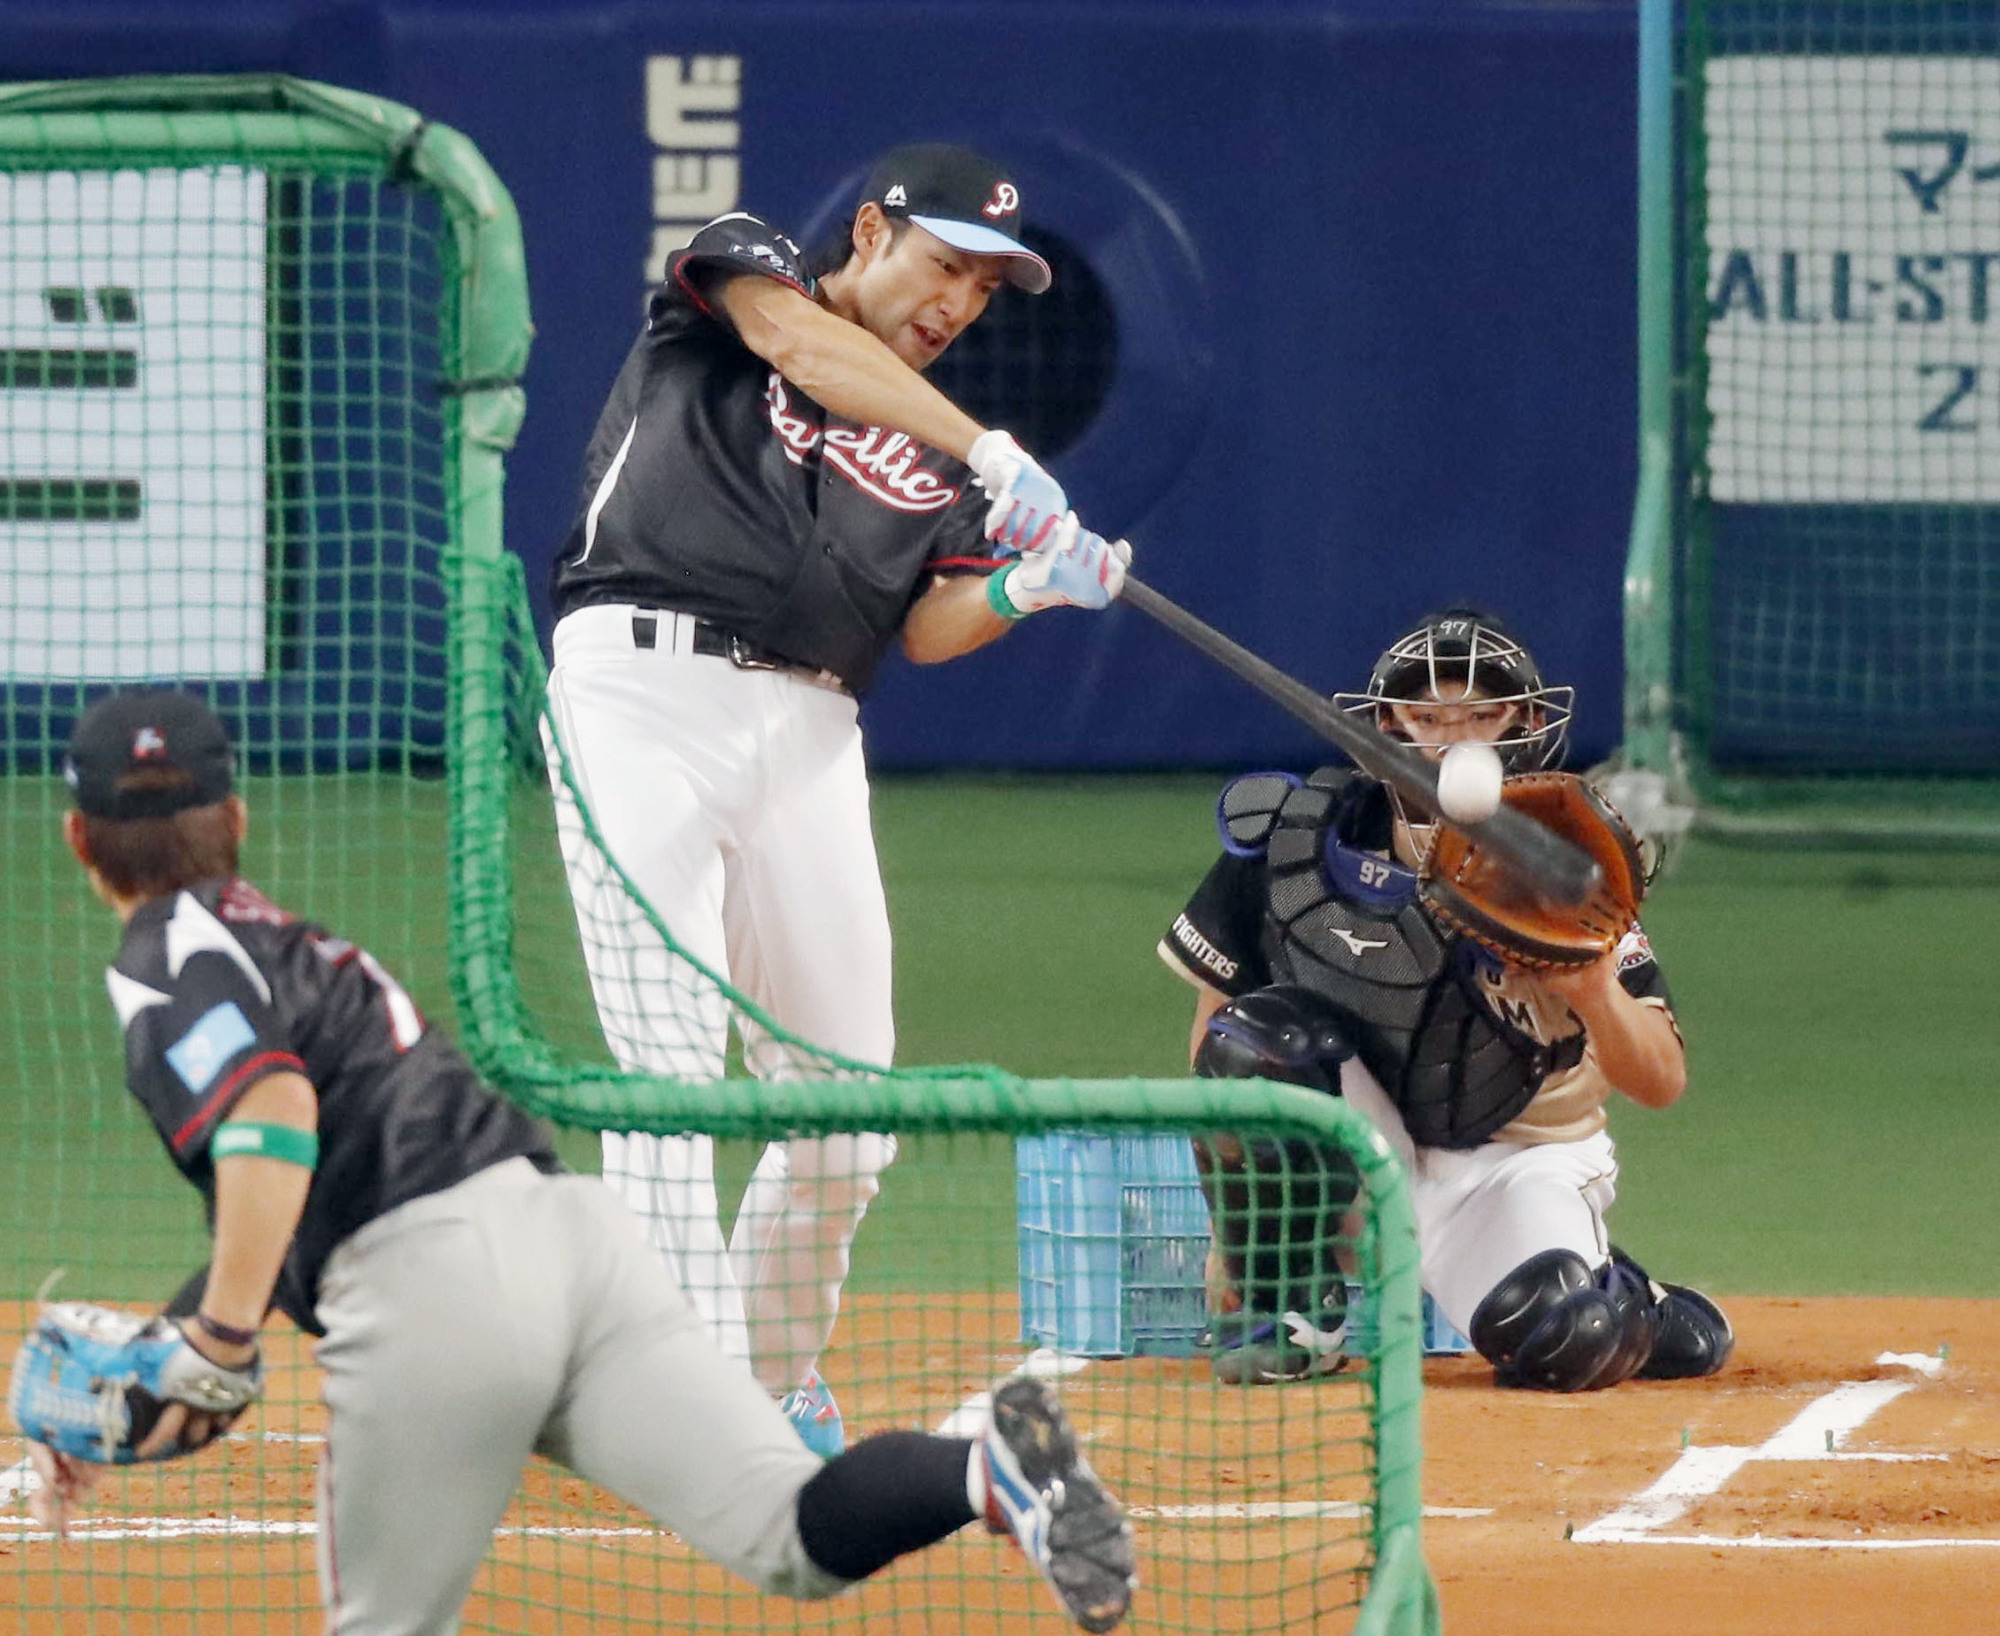 NPB should do more to spice up All-Star experience